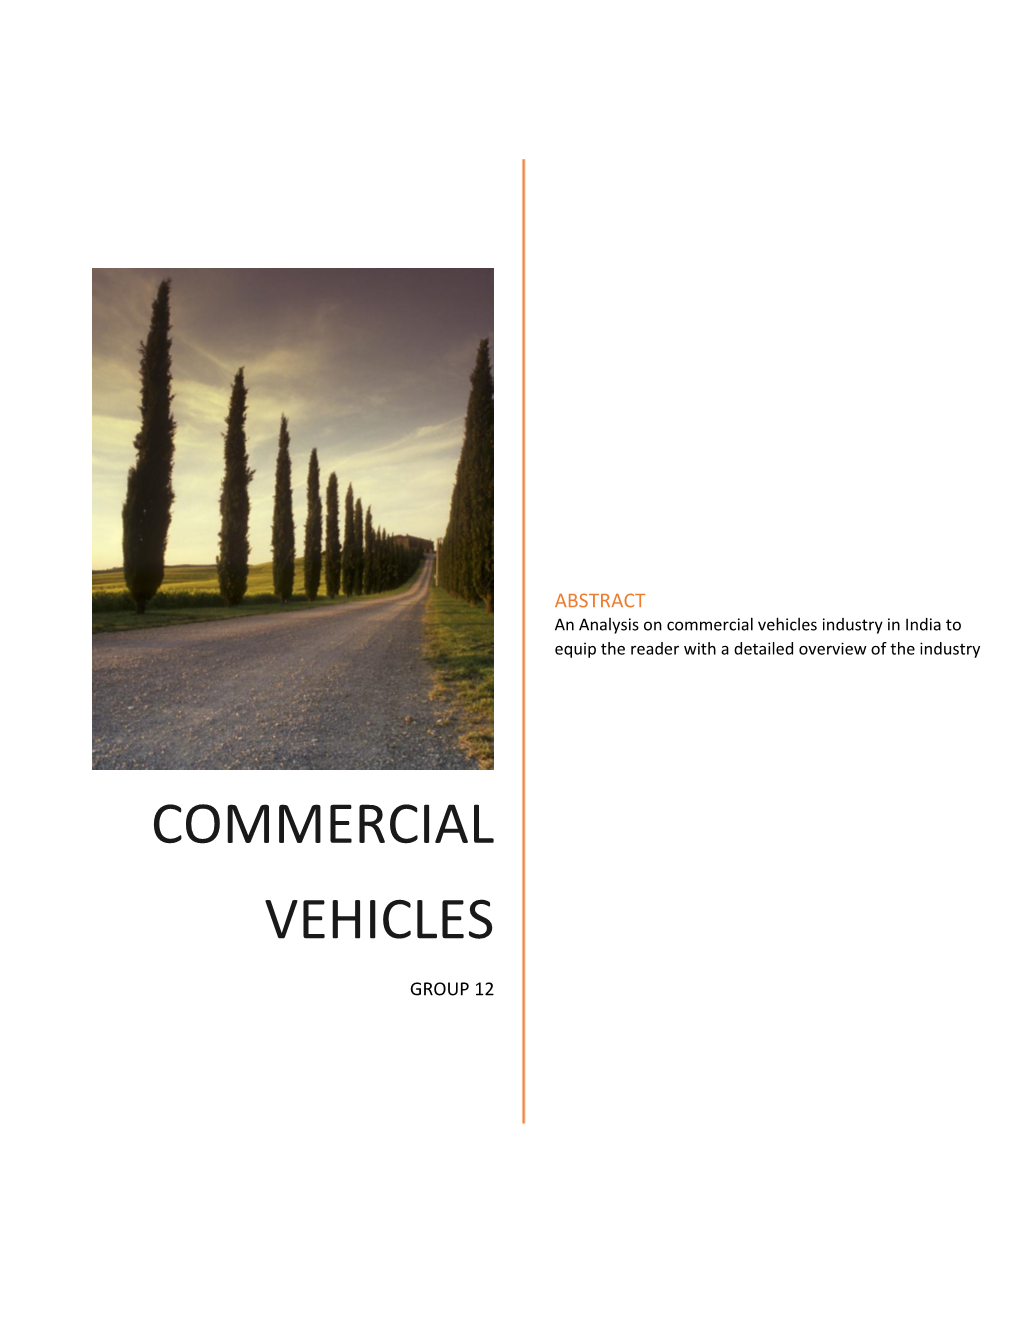 Commercial Vehicles Industry in India to Equip the Reader with a Detailed Overview of the Industry